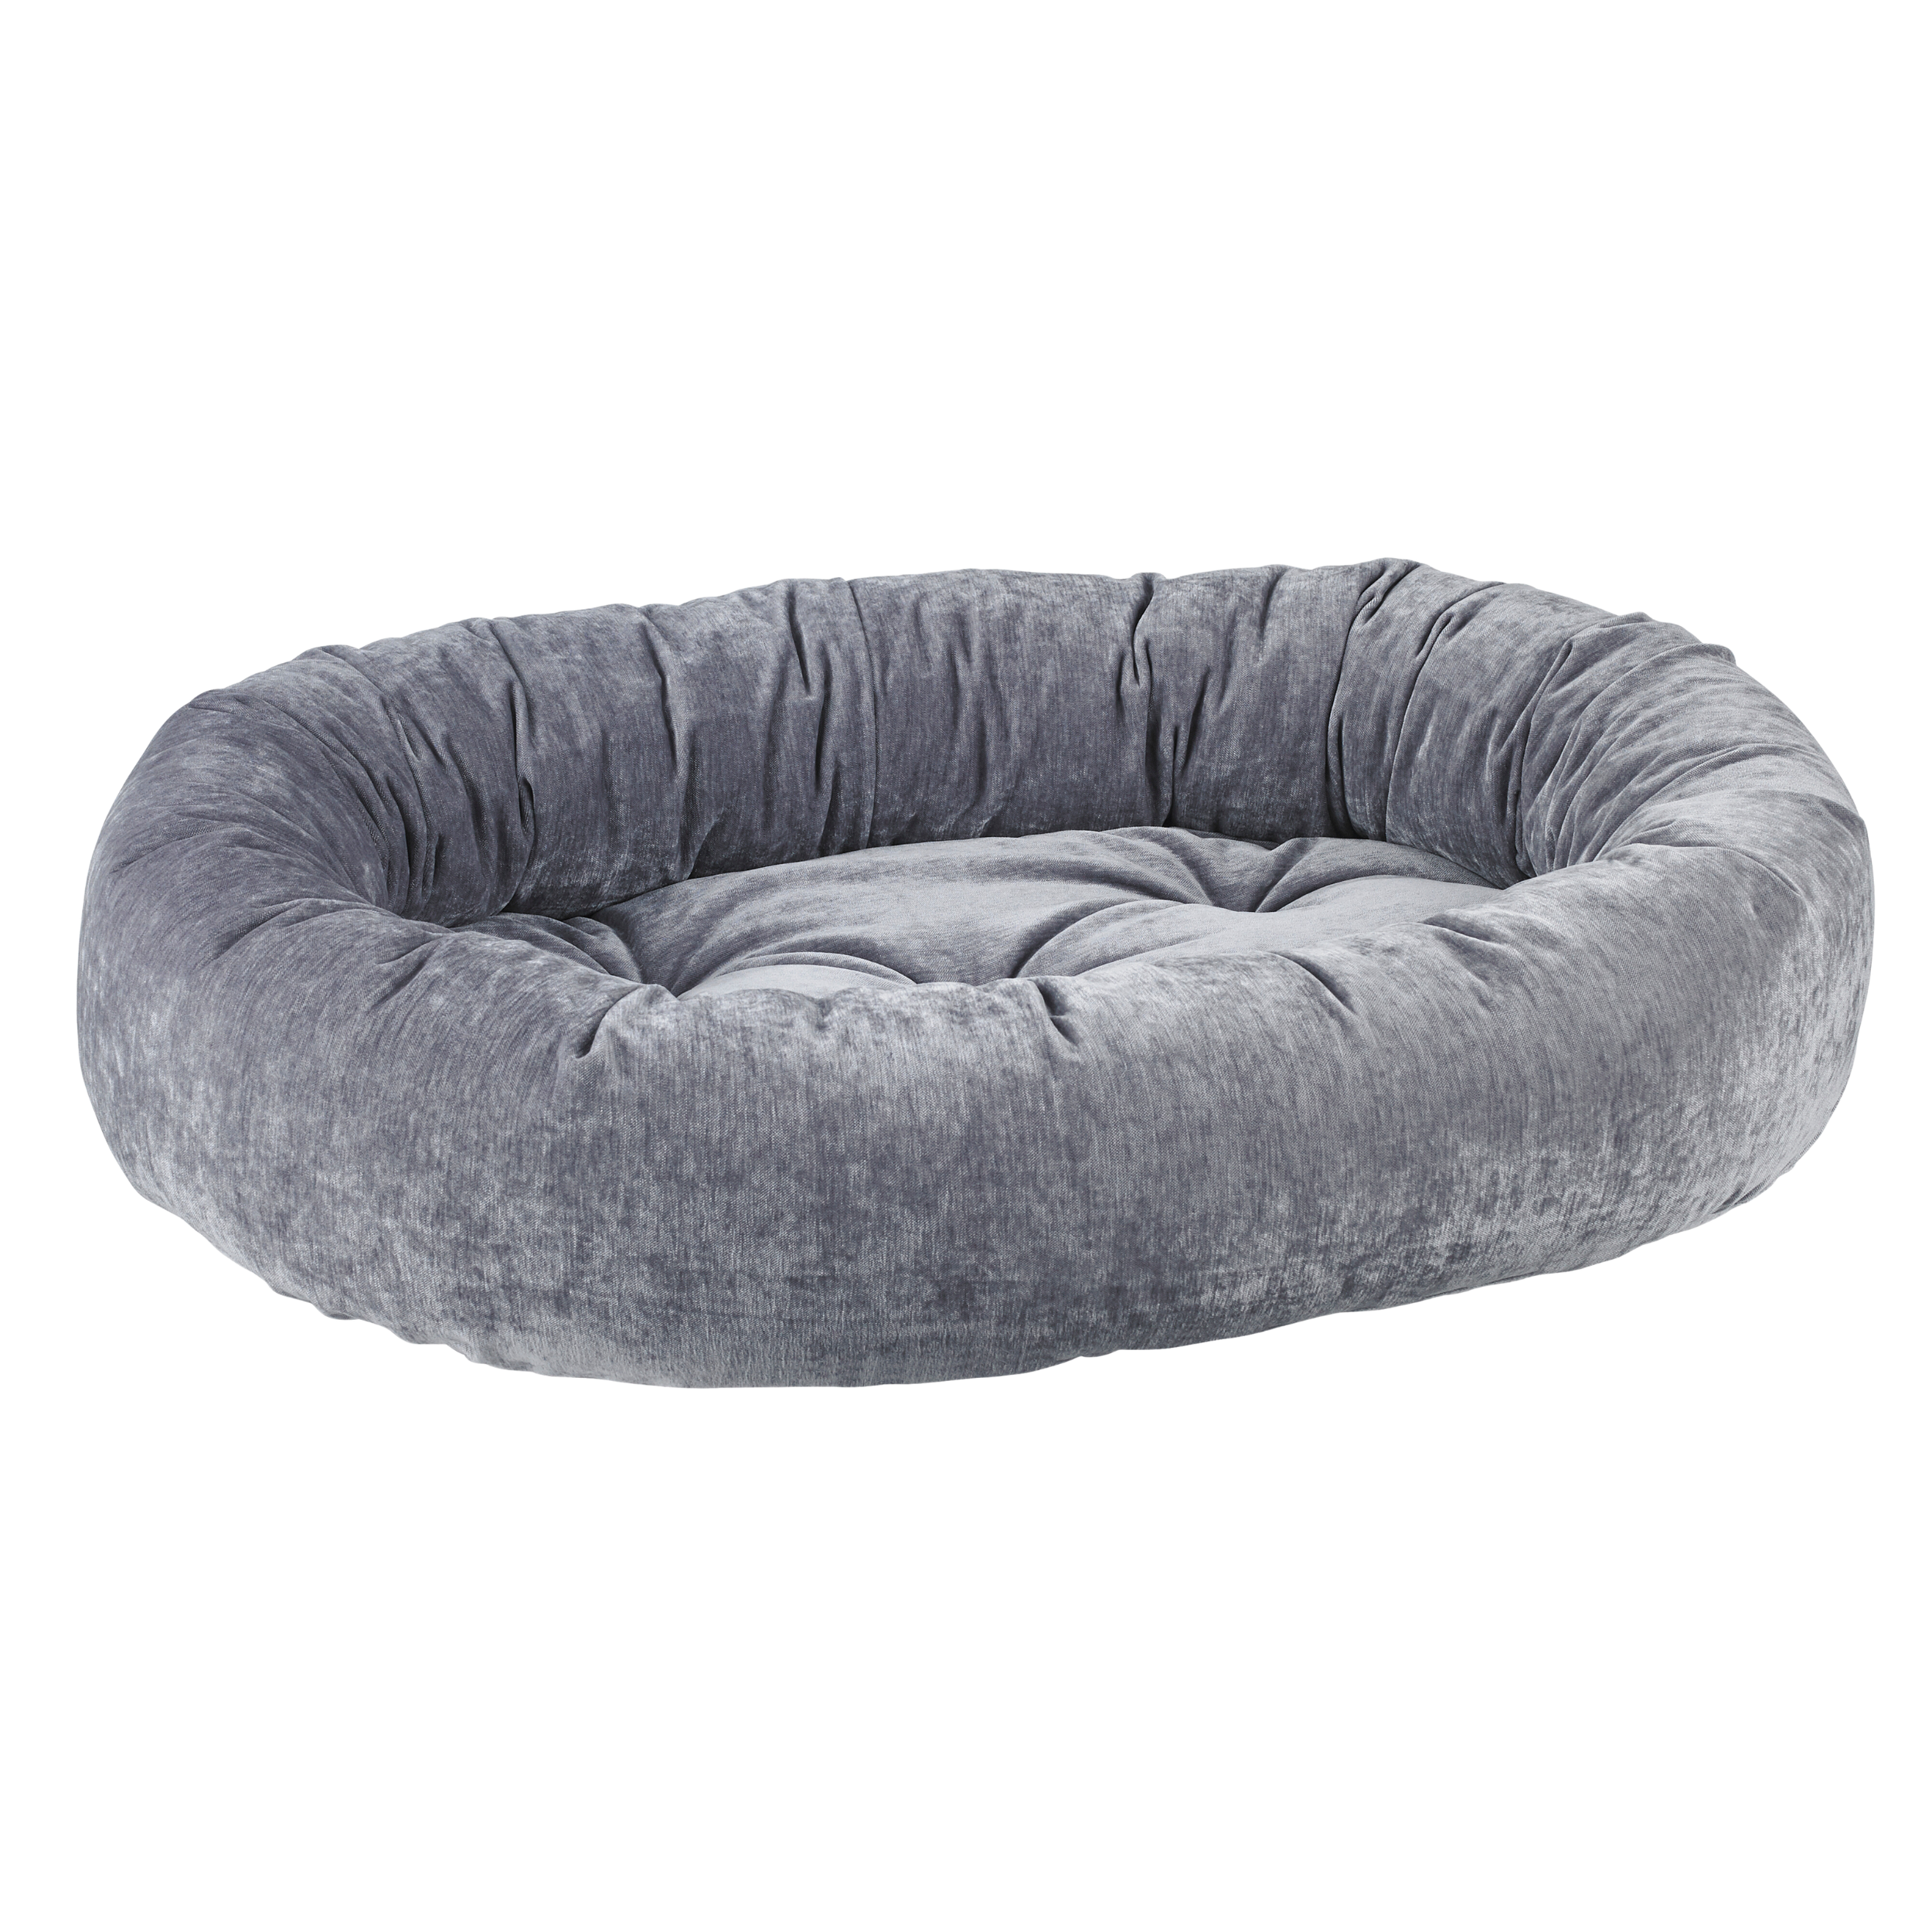 Lakeside Chenille Donut Pet Dog Bed